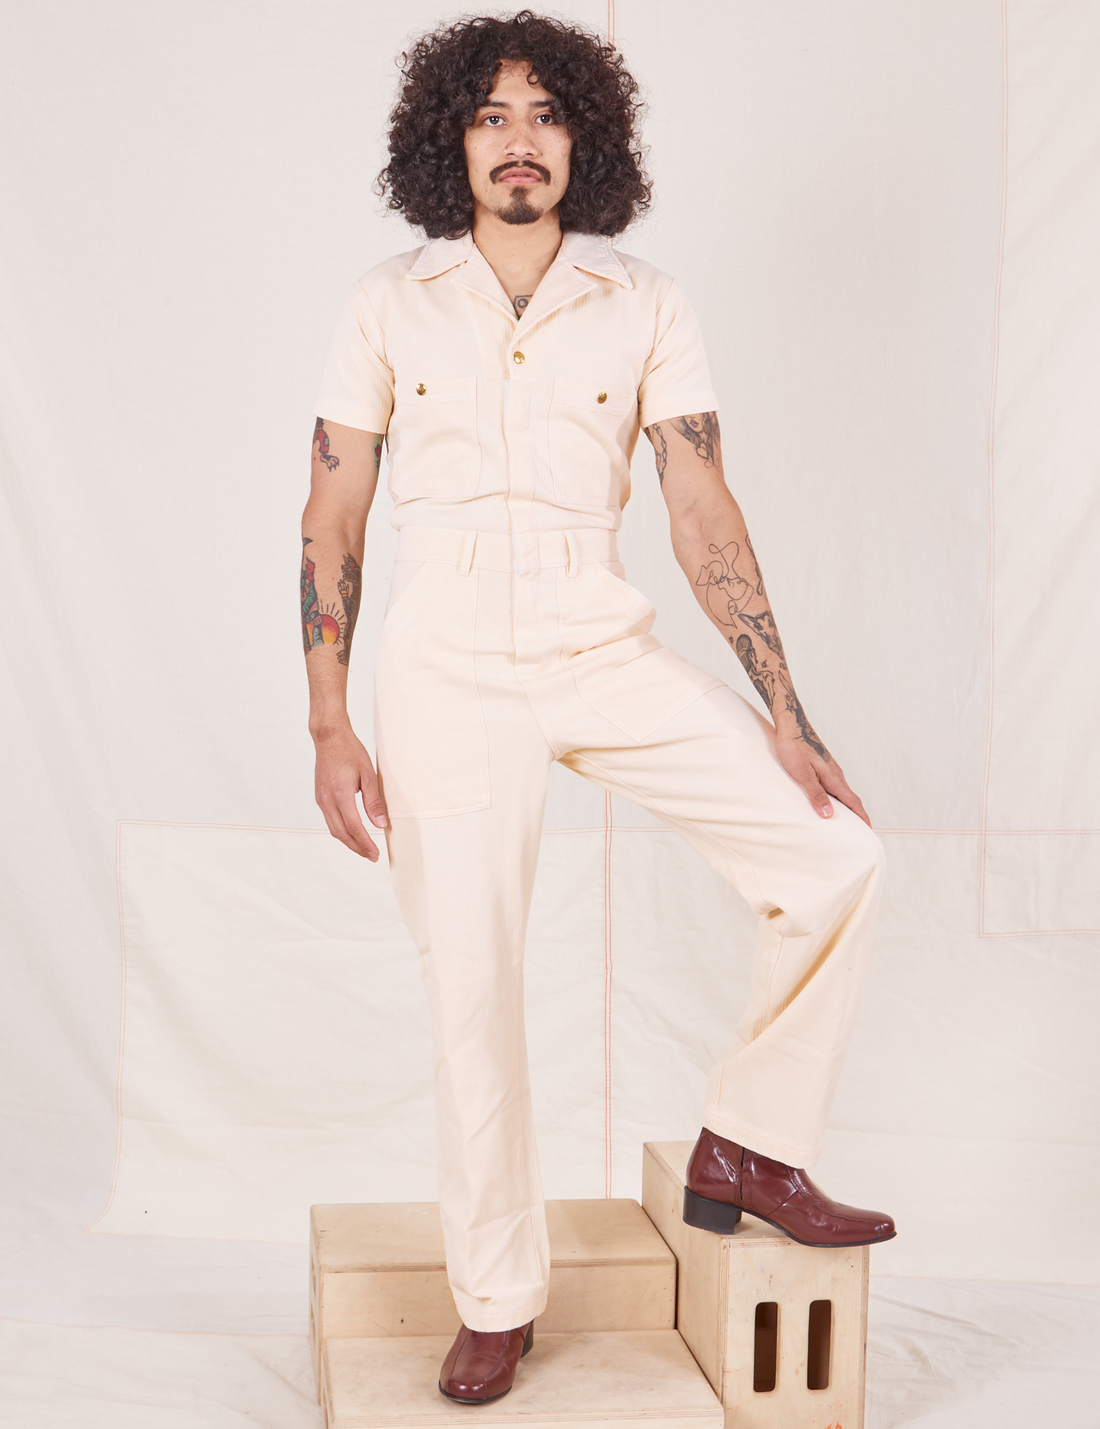 Jesse is 5'8" and wearing size S Heritage Short Sleeve Jumpsuit in Natural